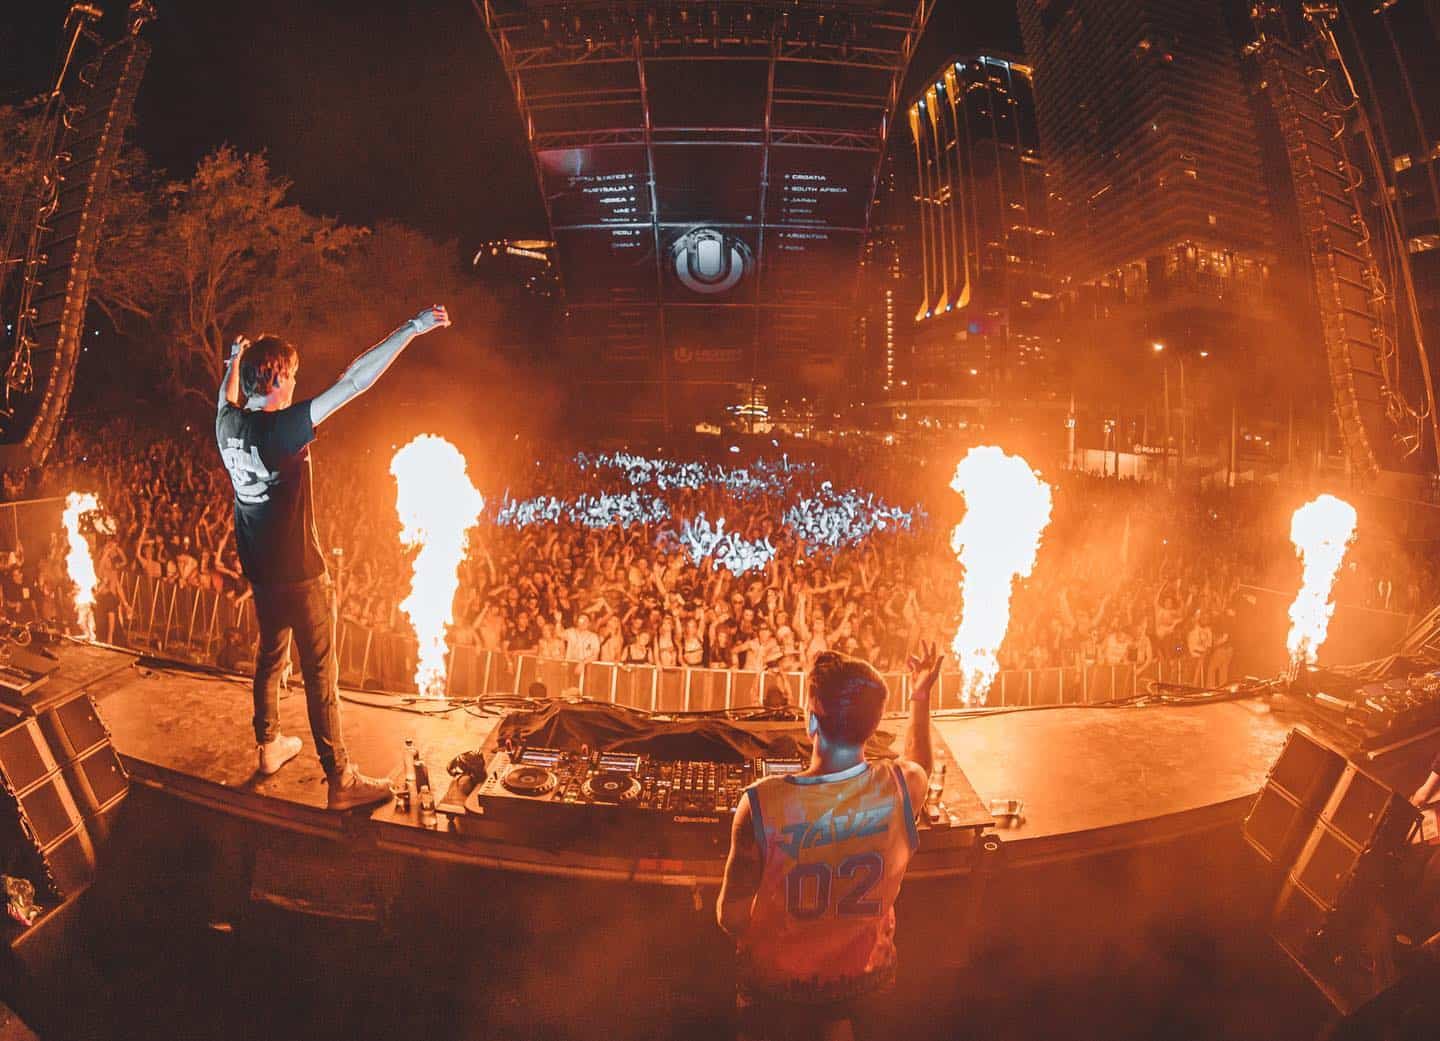 Jauz and NGHTMRE go B2B for the first time in explosive Ultra set: Watch